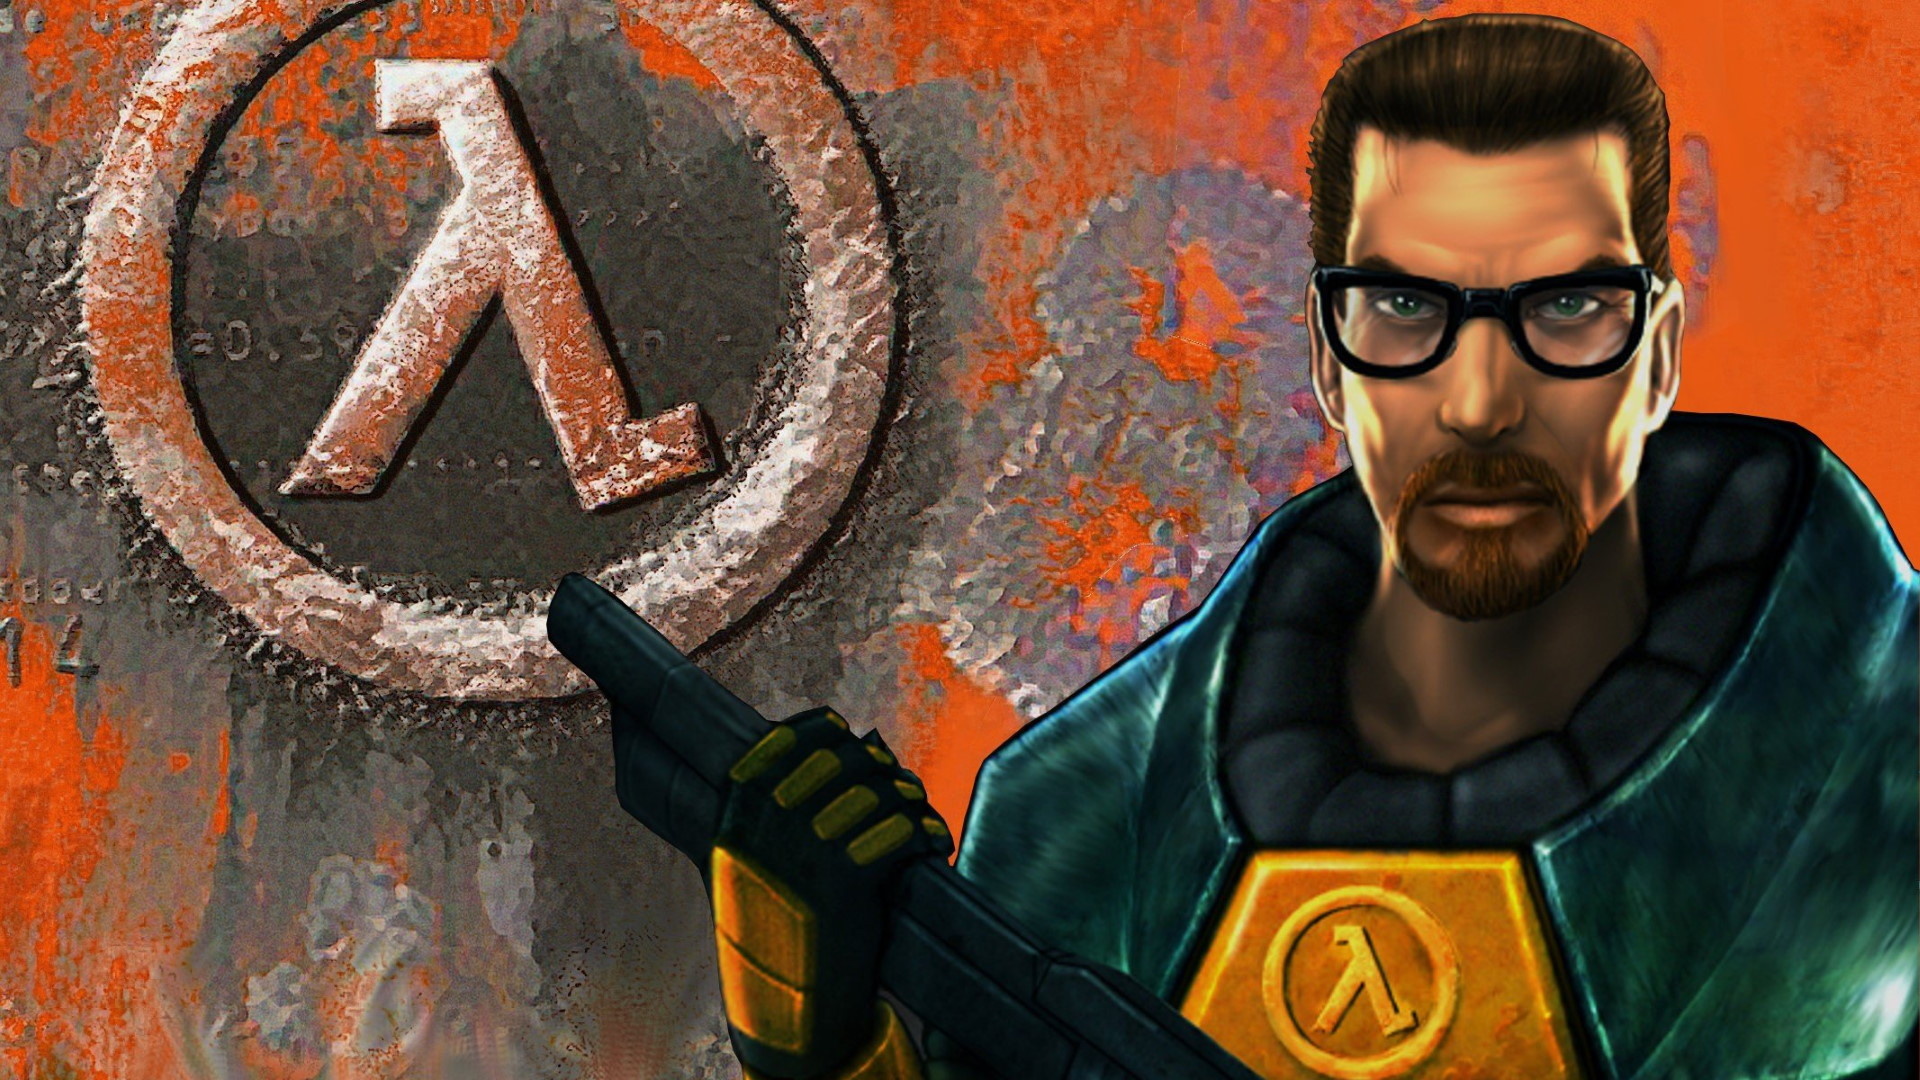 Half-Life game, Official image, New release cover, 01net. com, 1920x1080 Full HD Desktop